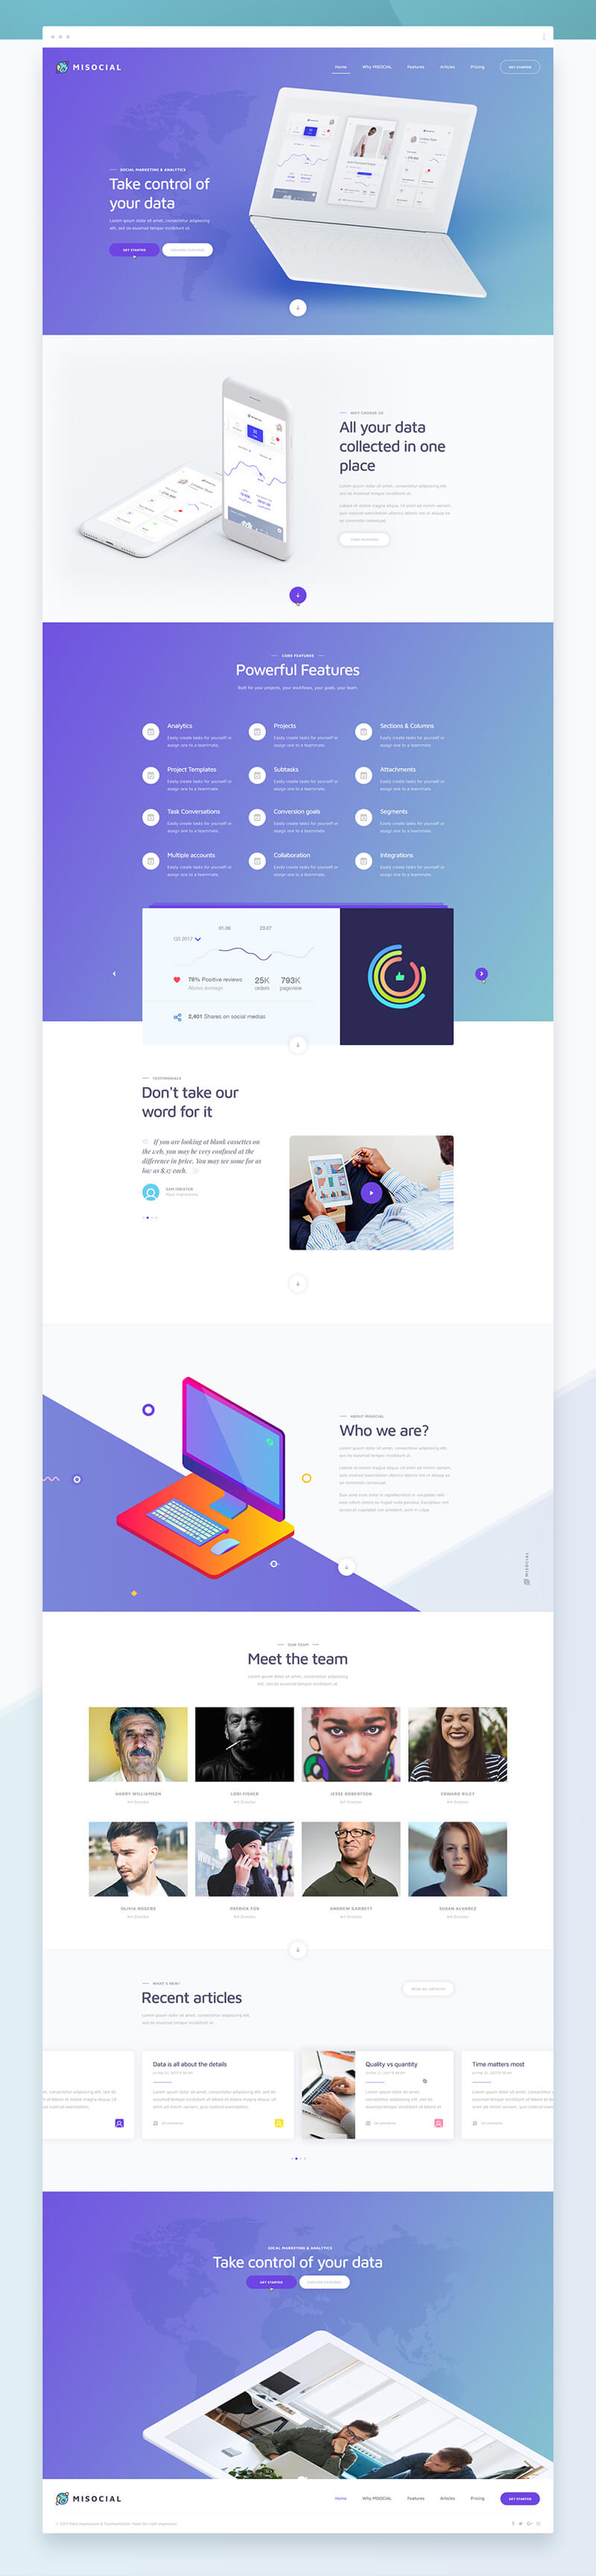 free-misocial-psd-website-template-full